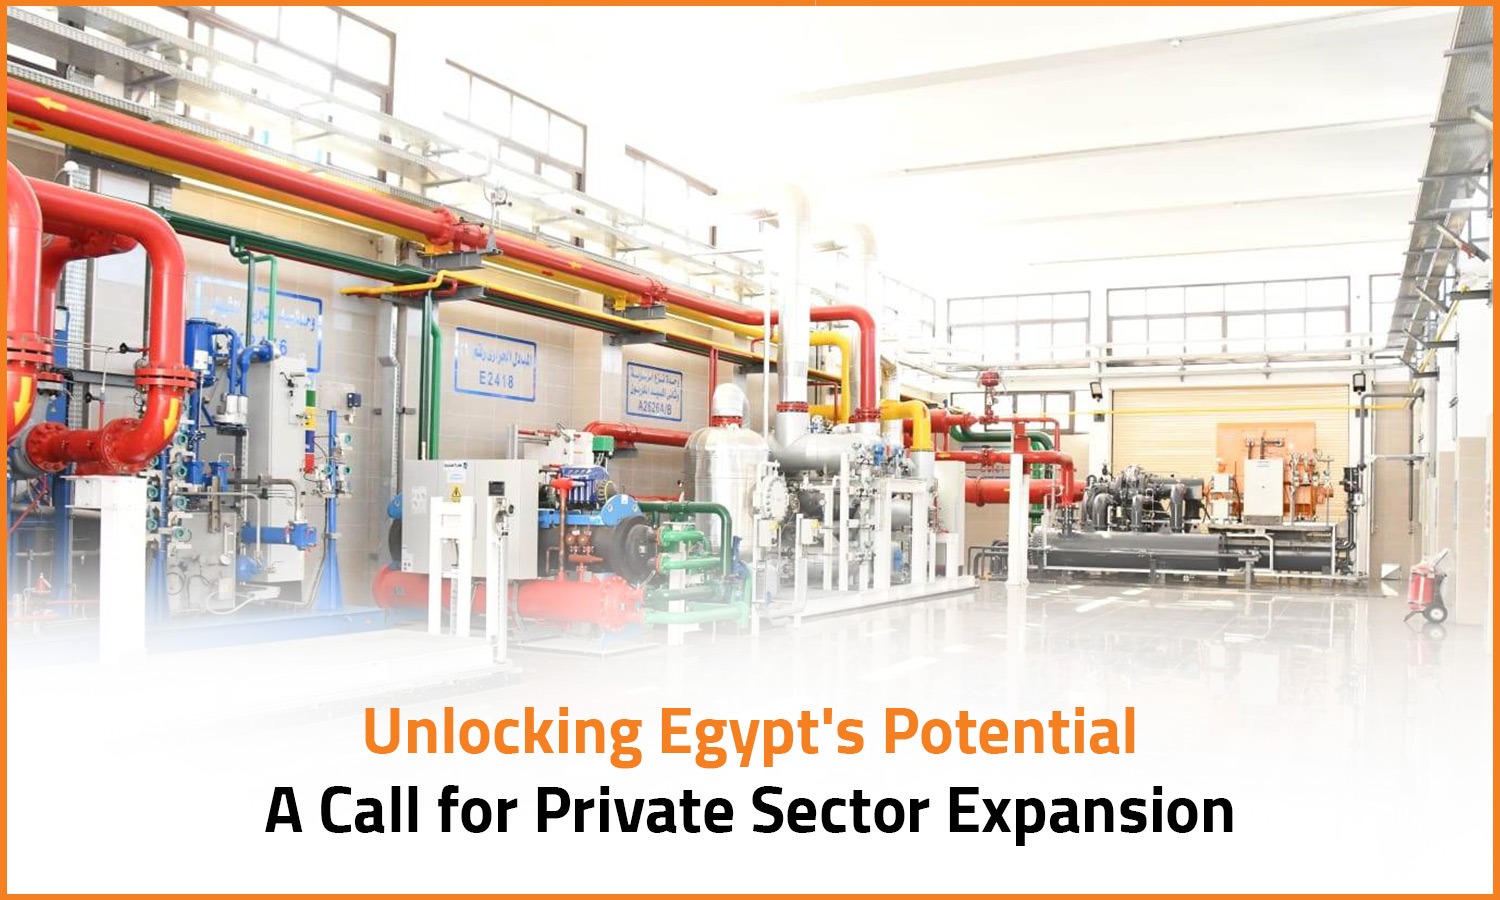 Unlocking Egypt's Potential: A Call for Private Sector Expansion

